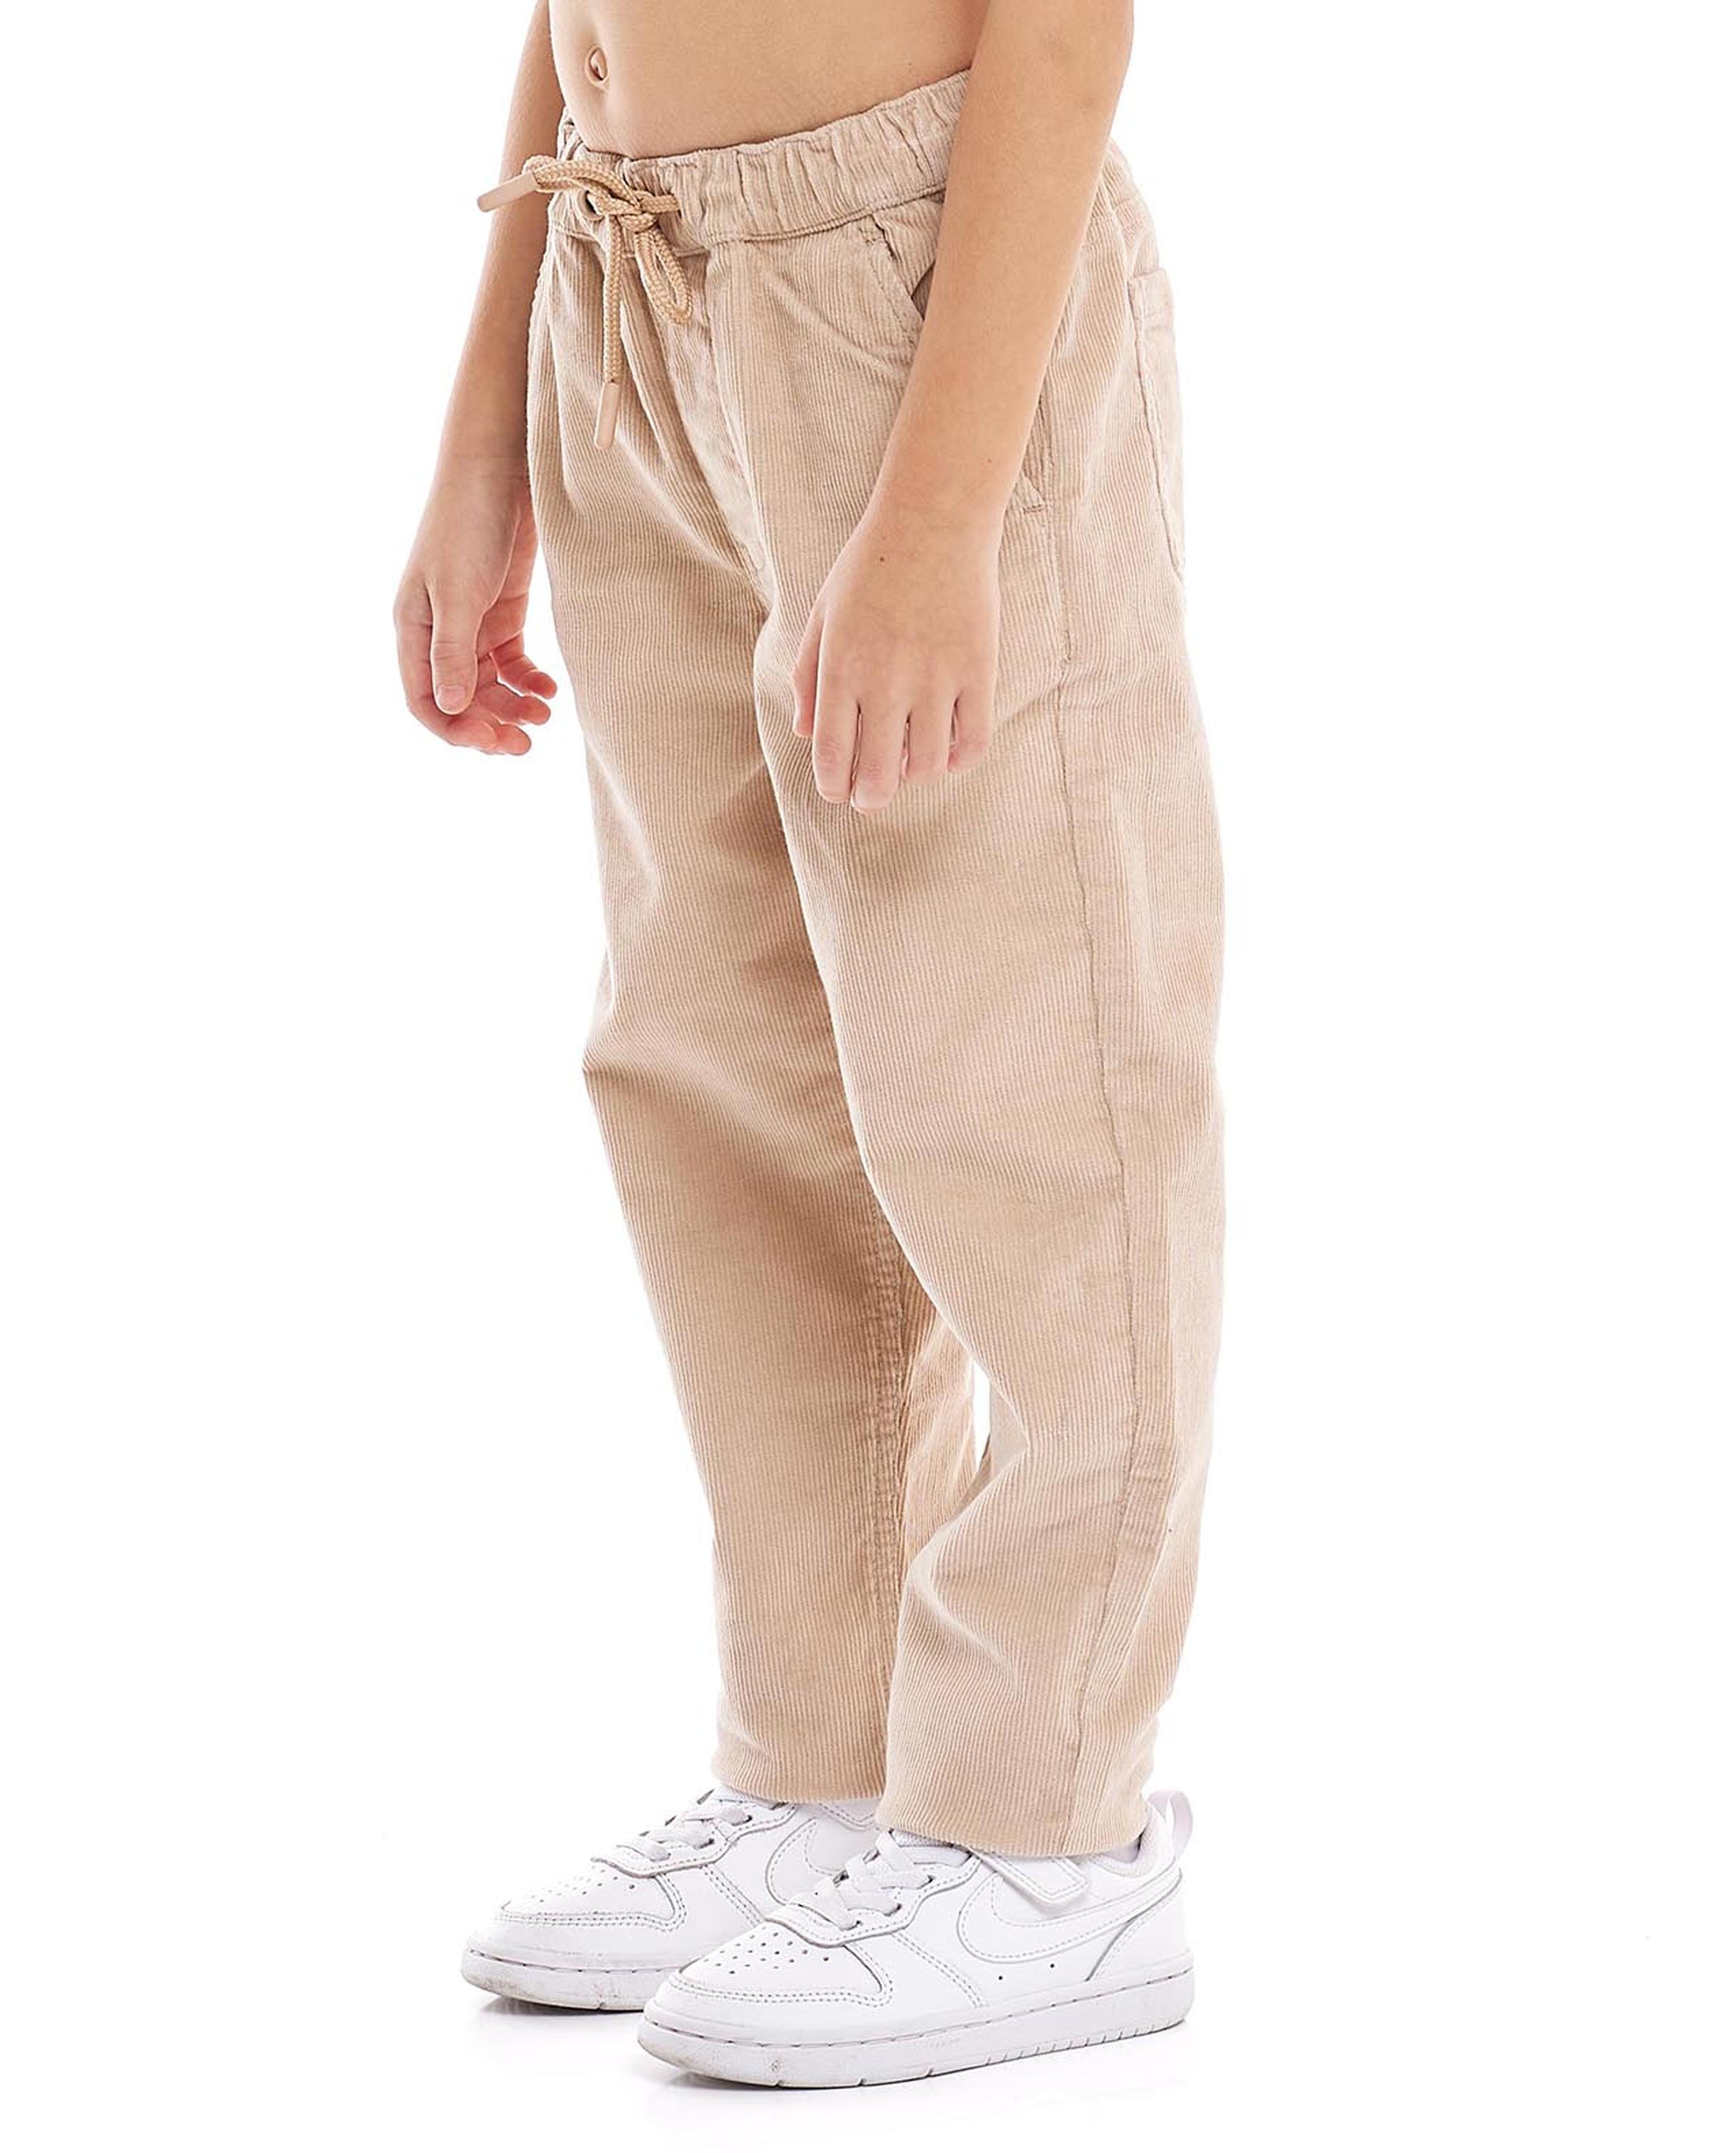 Corduroy Relaxed fit Trousers with Drawstring Waist